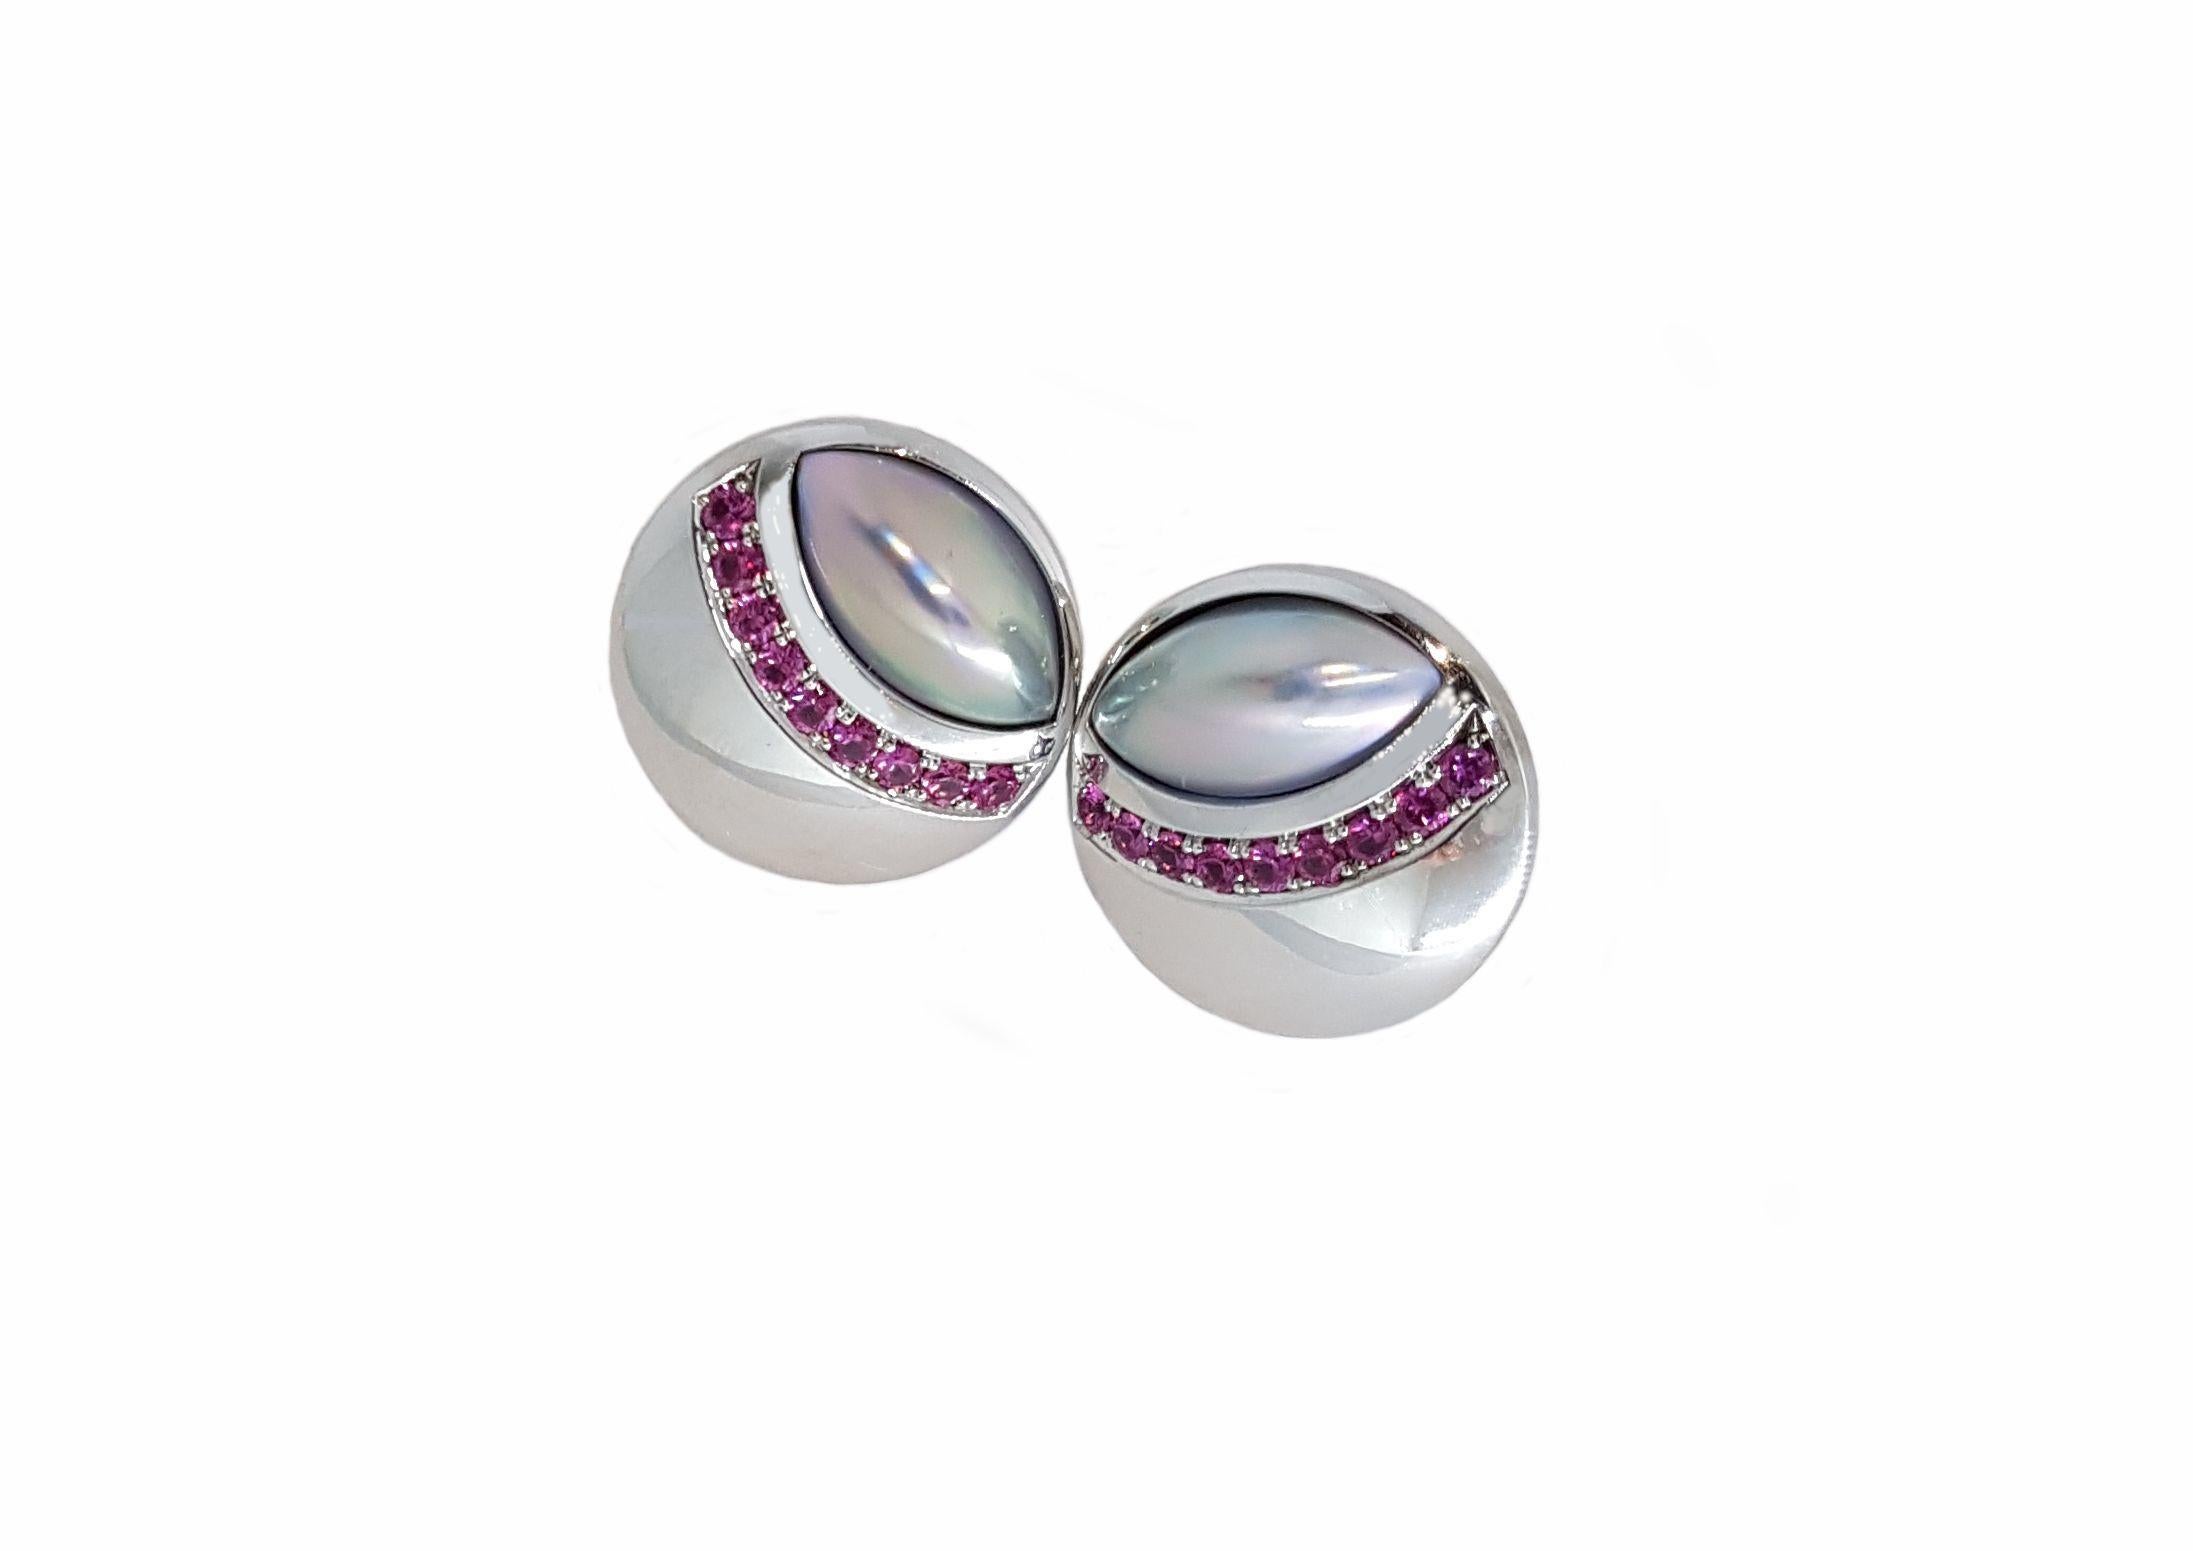 Luxurious earings made of 18 carat white gold, large mabé pearls  9,5 x 17 mm / 0.374 x 0,669 inches and 18 red Saphires with a total of 1.33 carats.
A frame of polished white gold sets the stage for the pearls with a very good luster and their